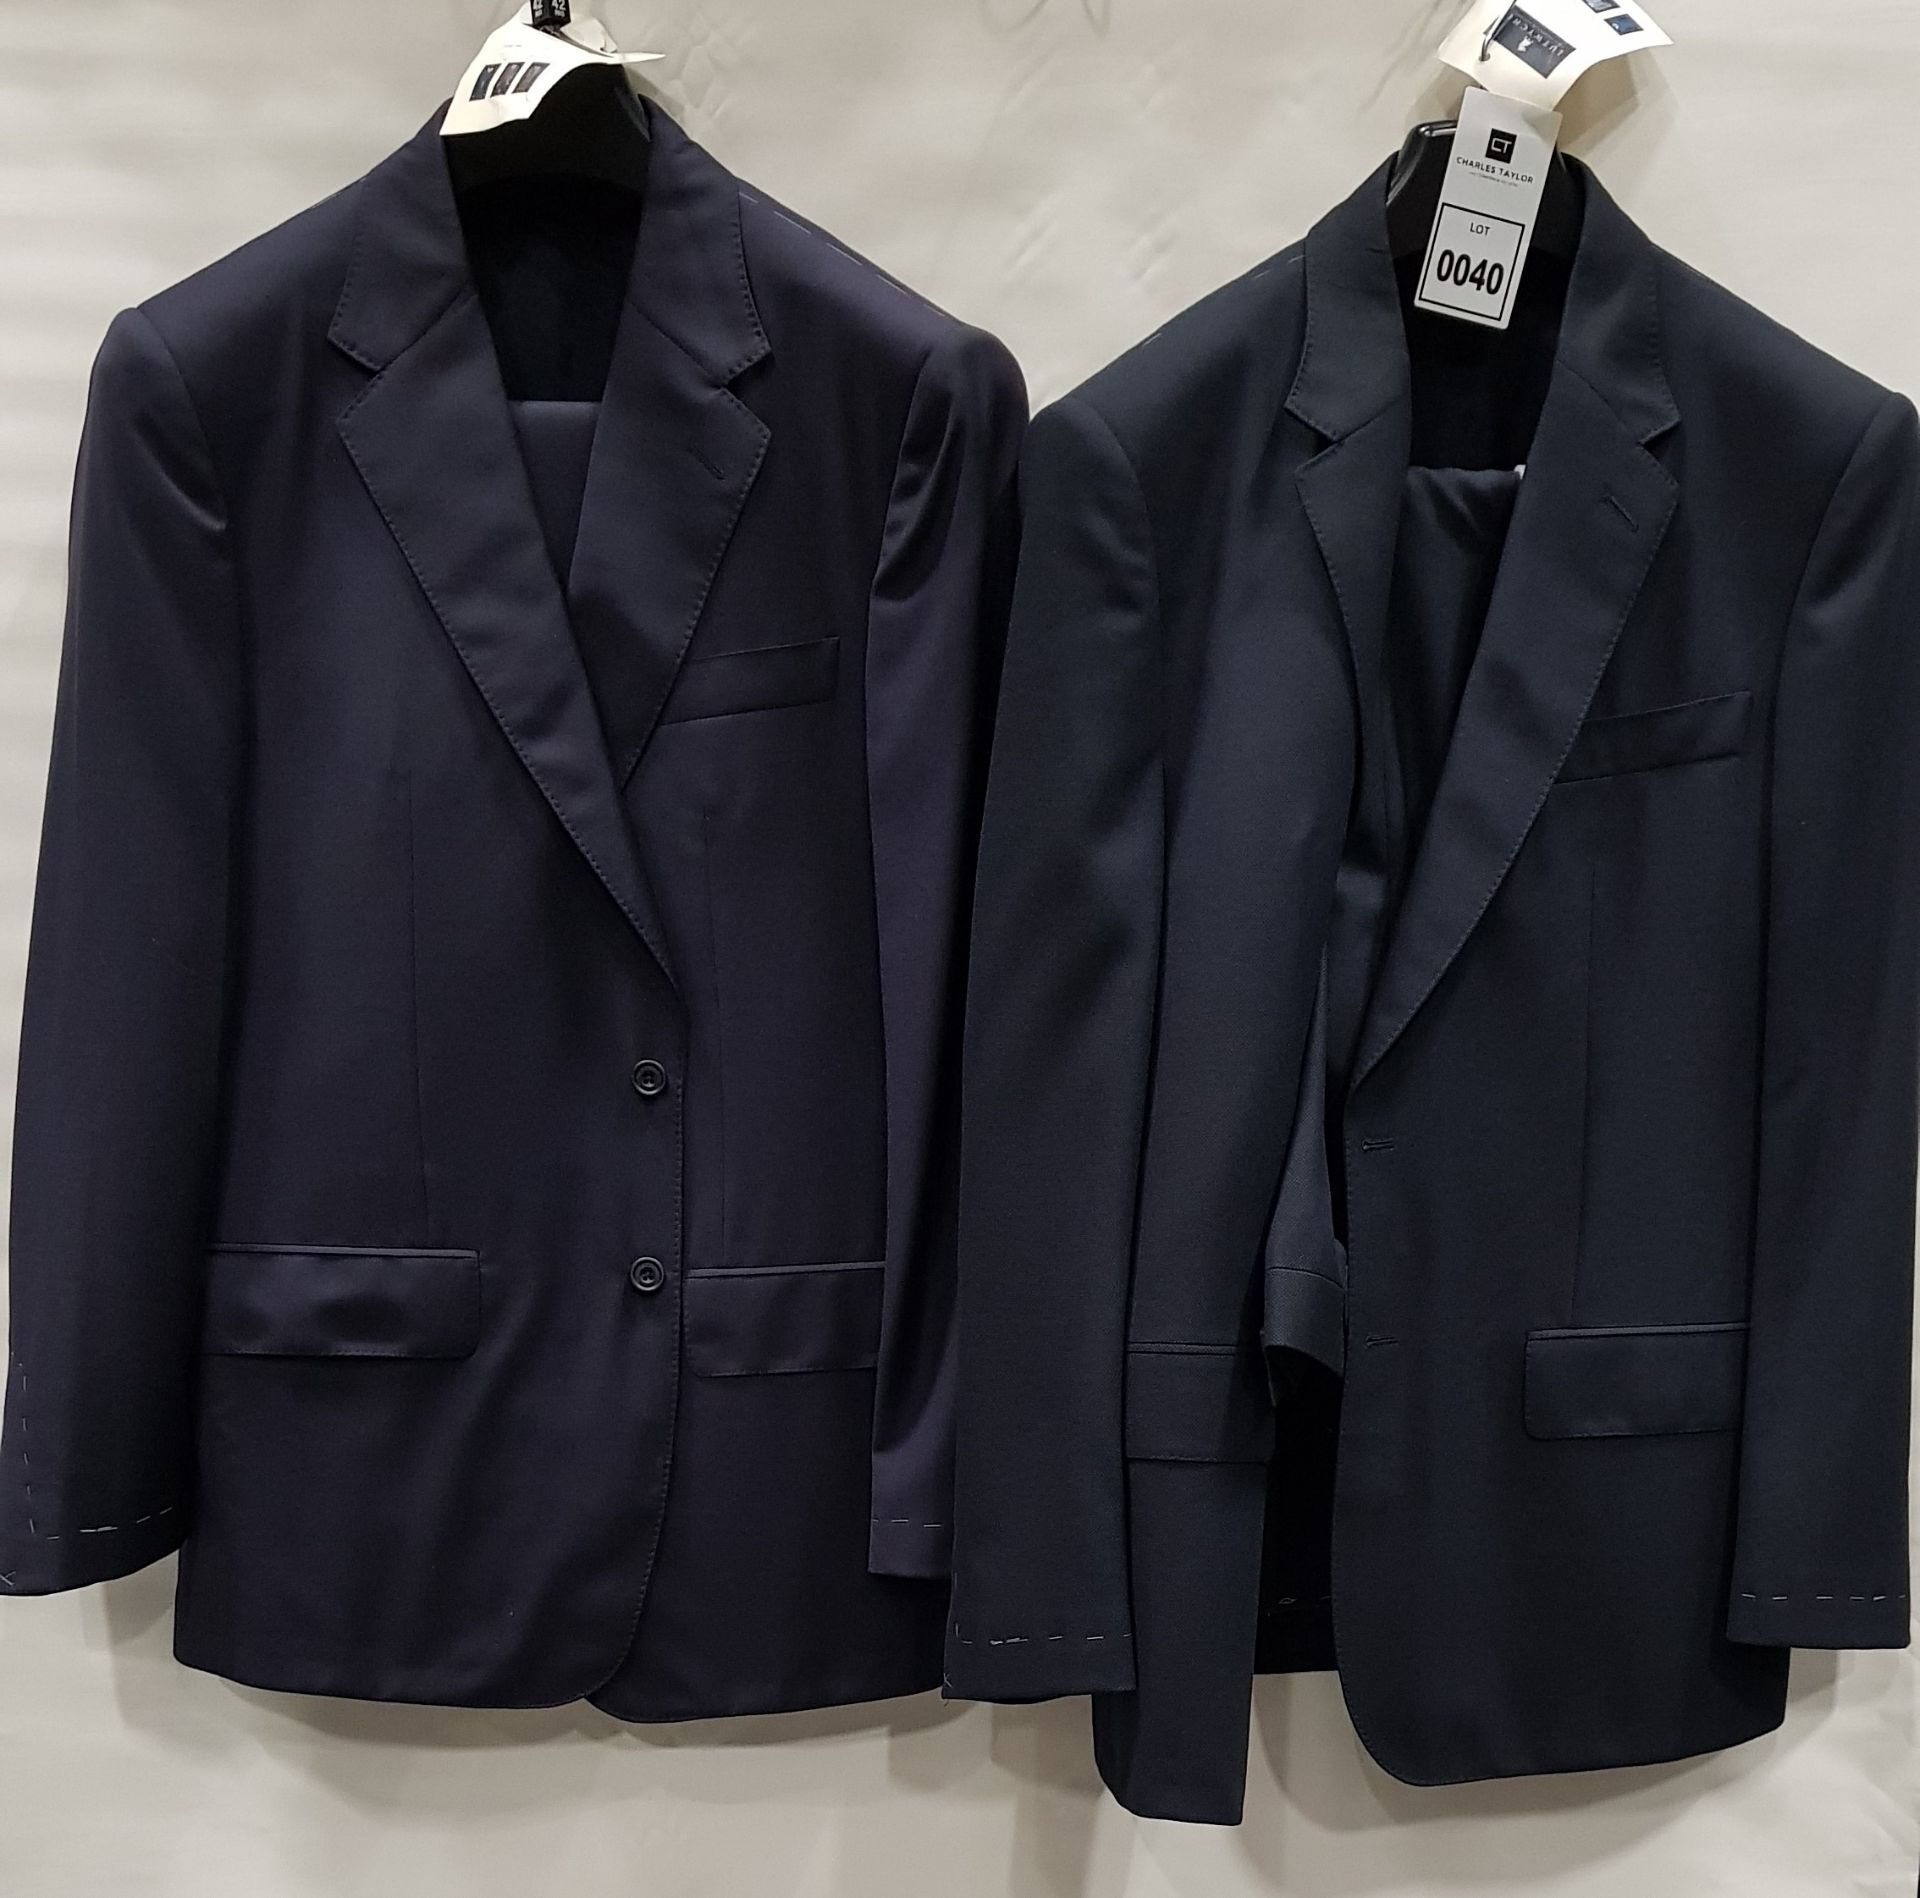 3 X BRAND NEW LUTWYCHE 2 PC DARK BLUE SHADES MATCHING SUITS SIZES 44R, 42R, 44R (NOTE NOT FULLY